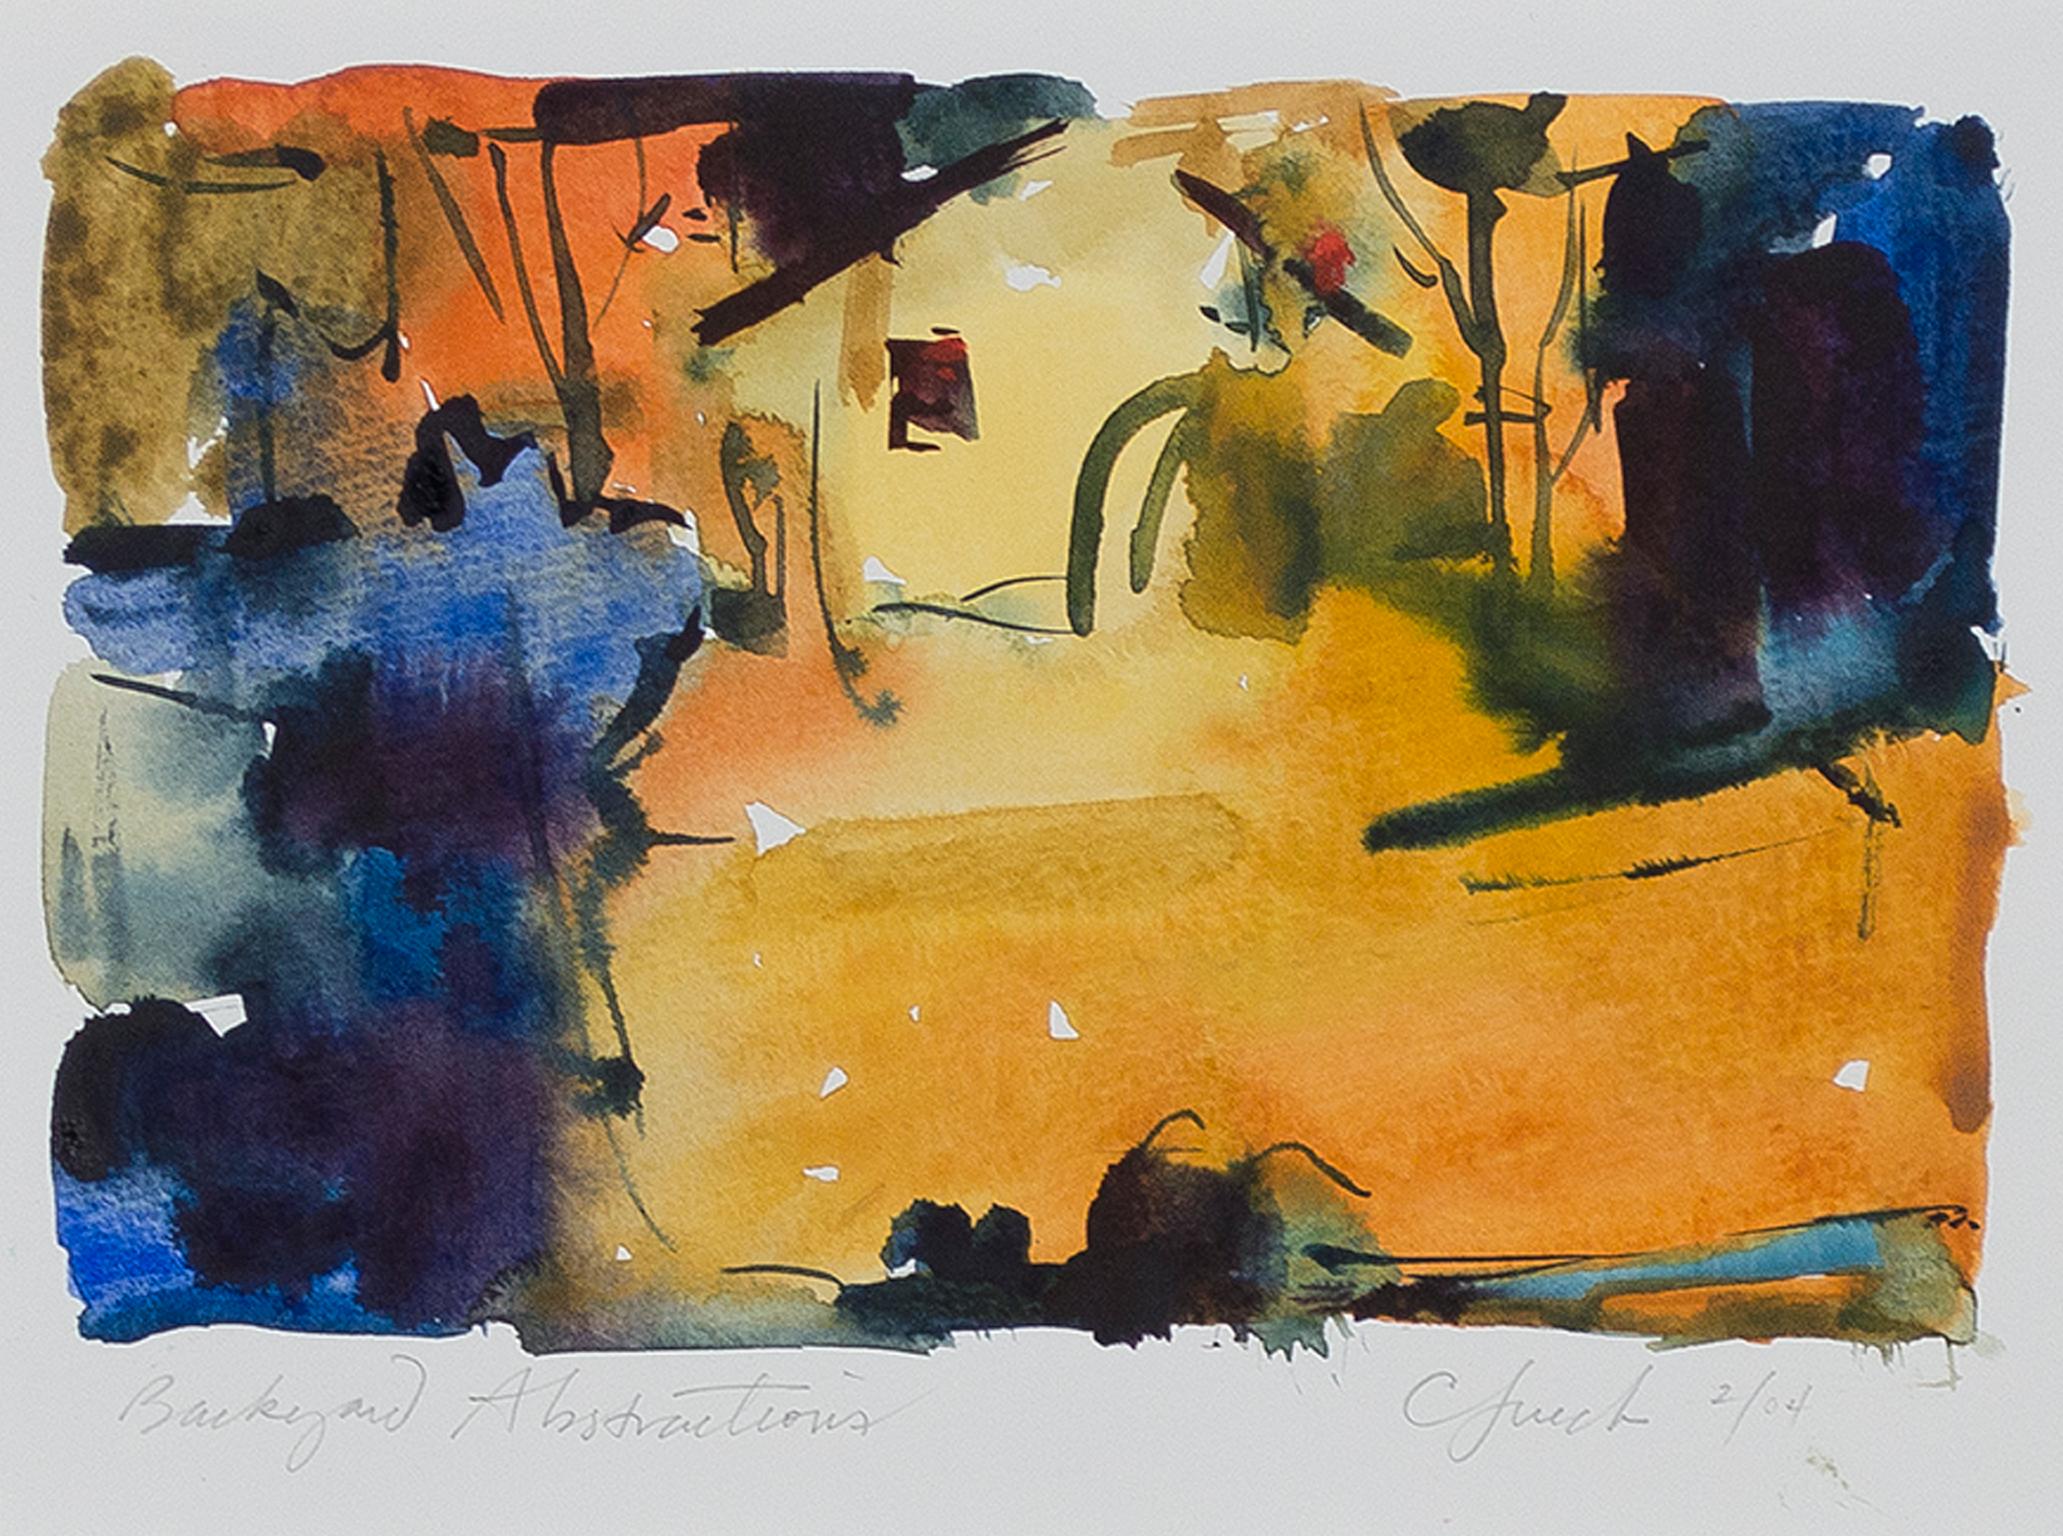 "Backyard Abstractions," Landscape Watercolor on paper signed by Craig Lueck